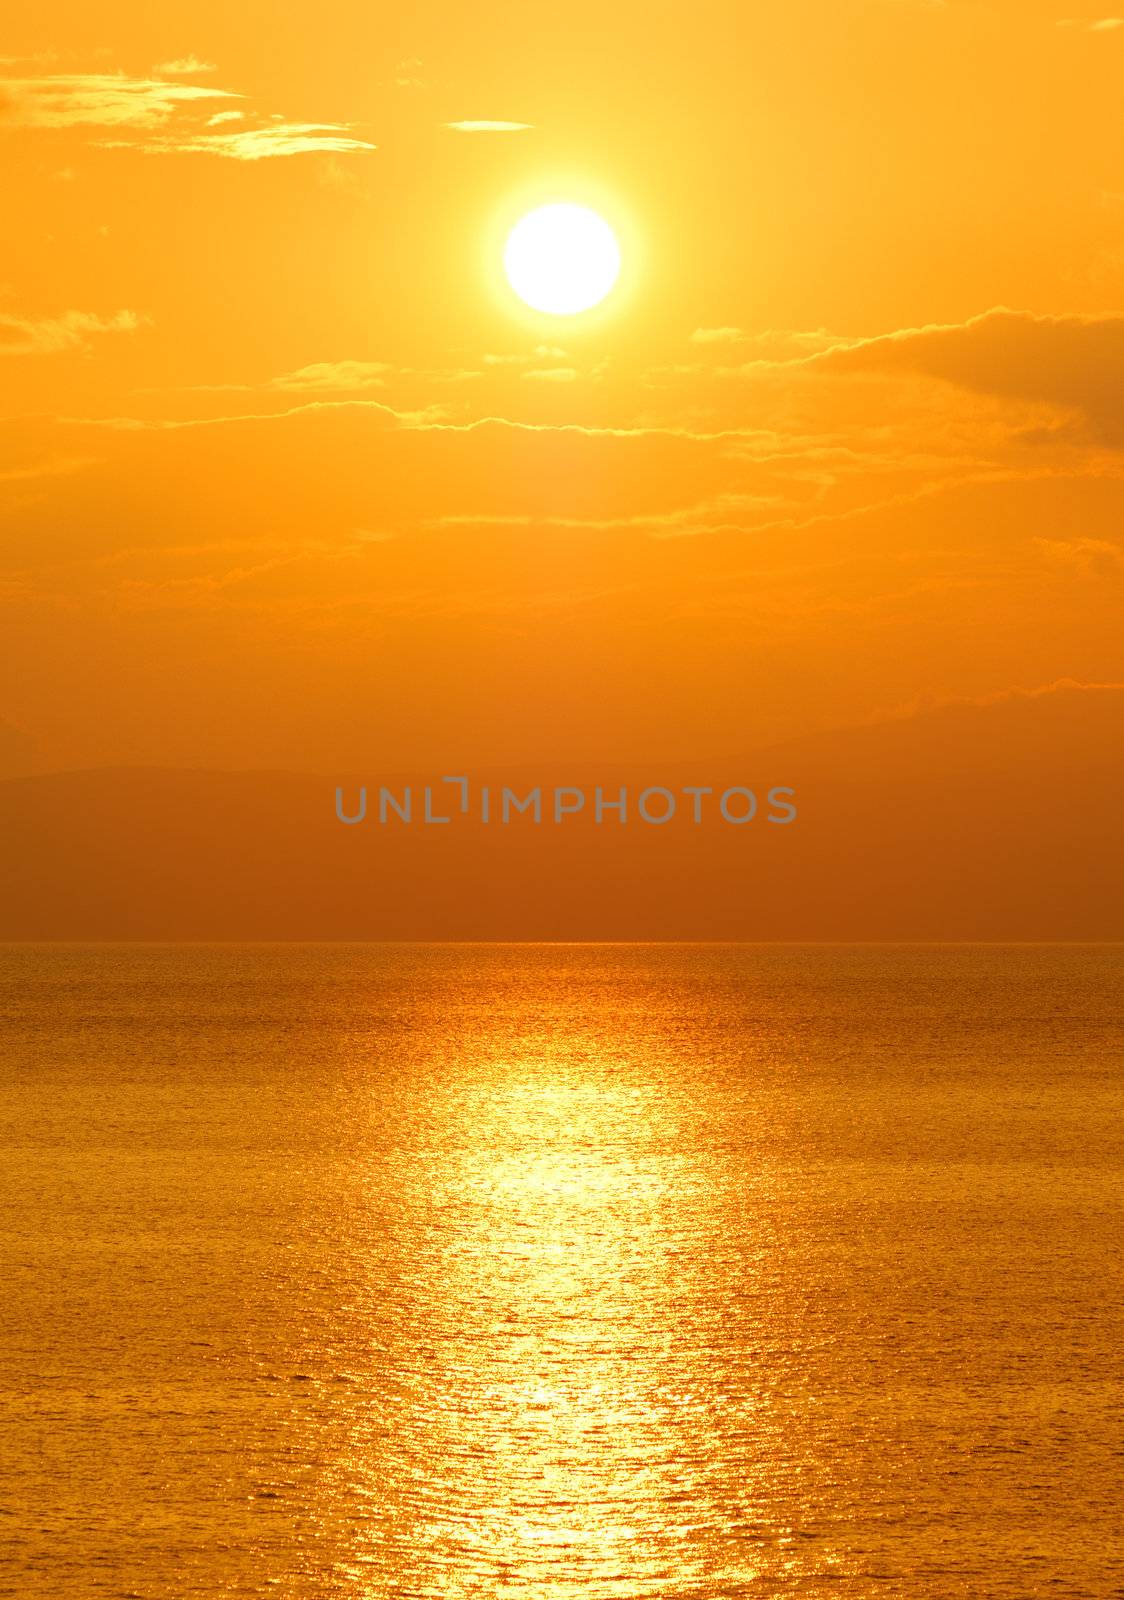 Image shows the sun setting over the Mediterranean Sea